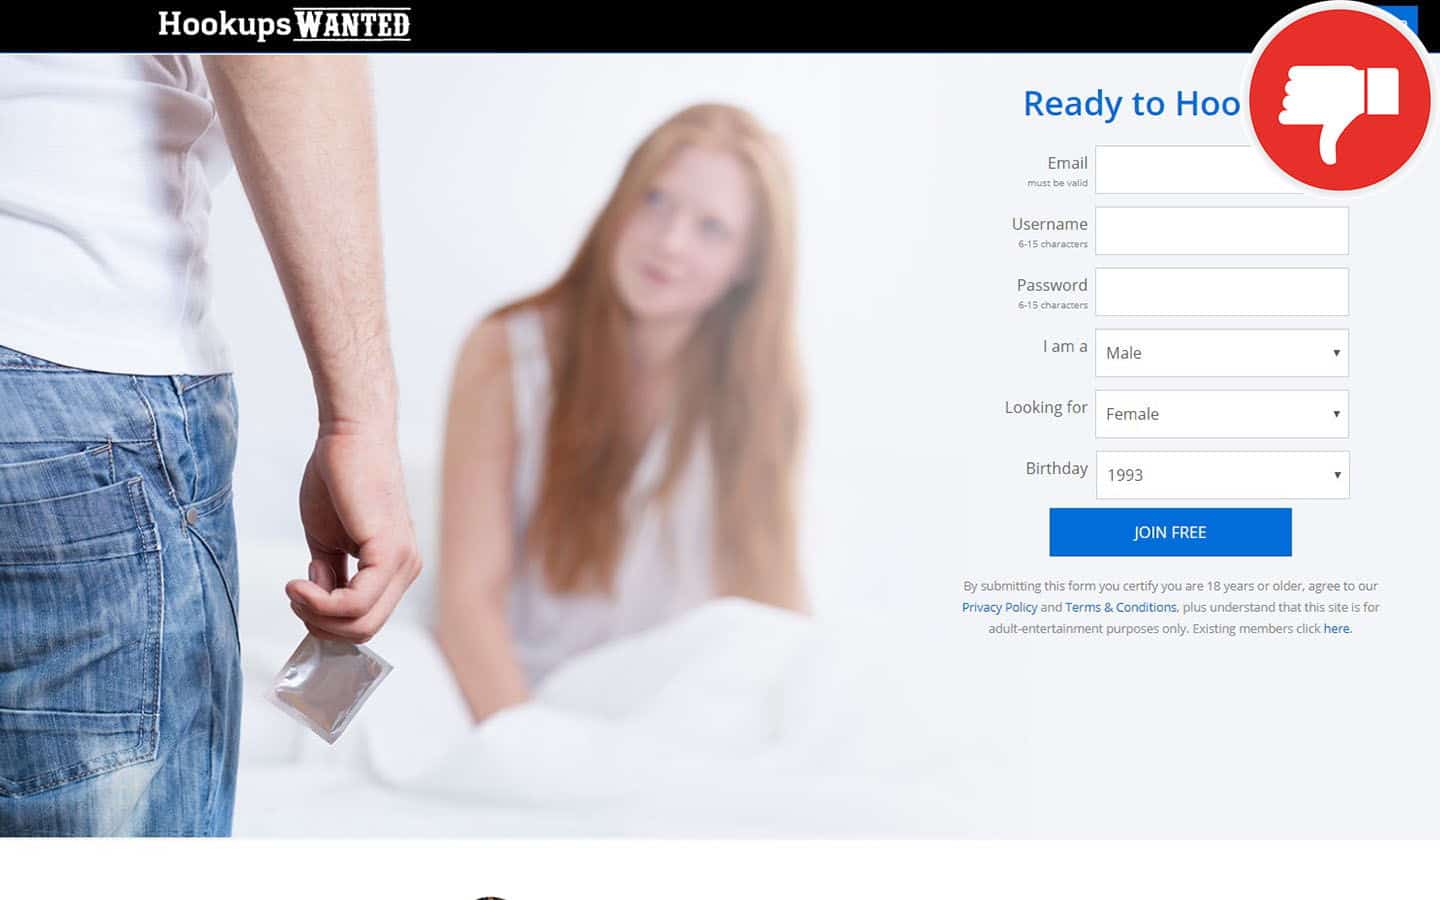 HookUpsWanted.com Review Scam